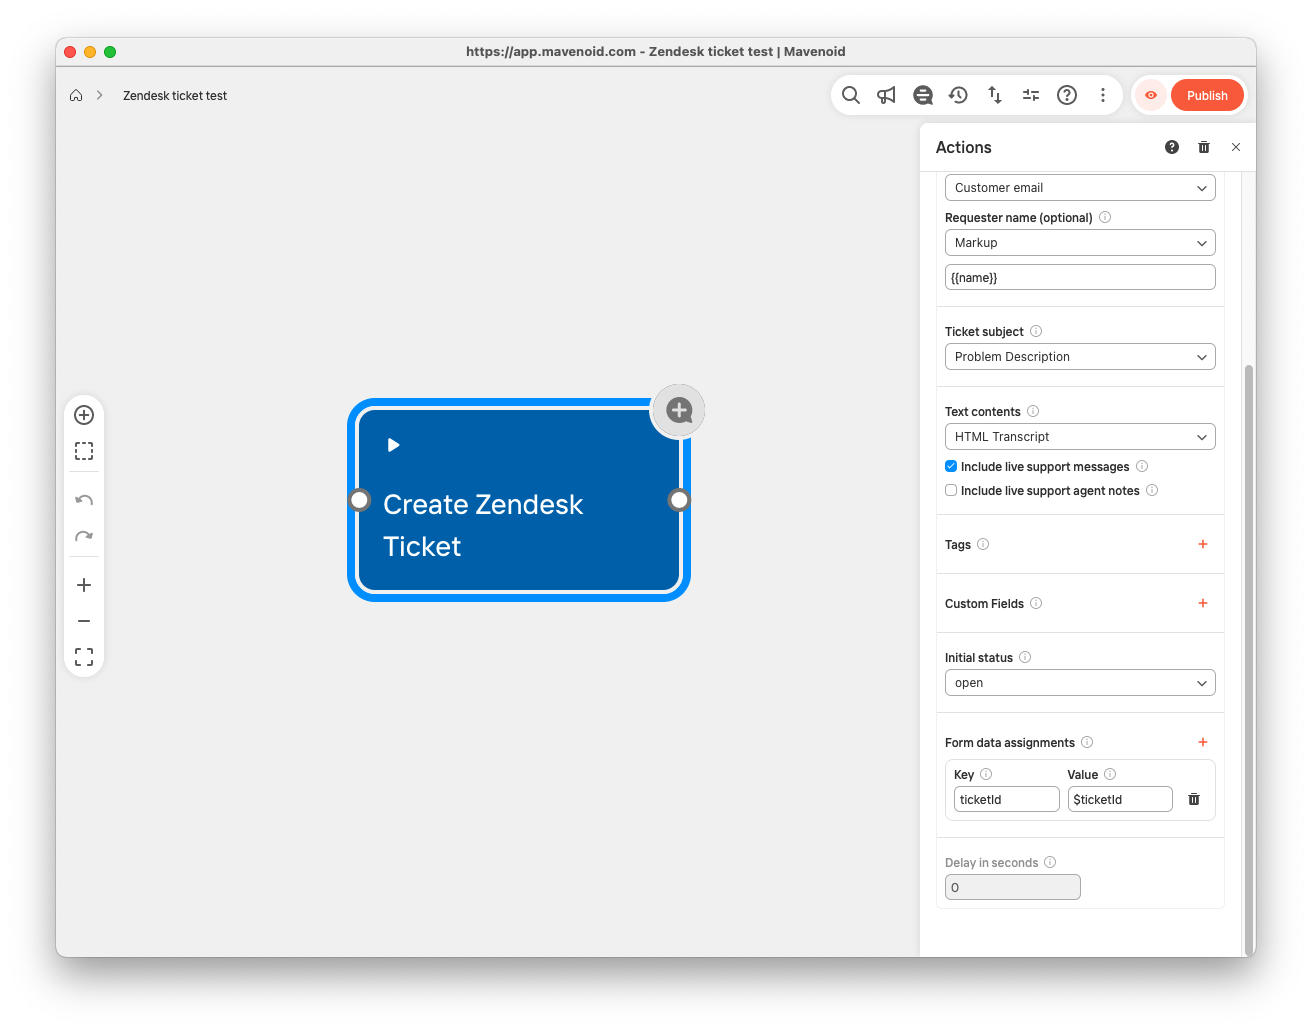 An actions node with an action to create a Zendesk ticket and store its ID in form data